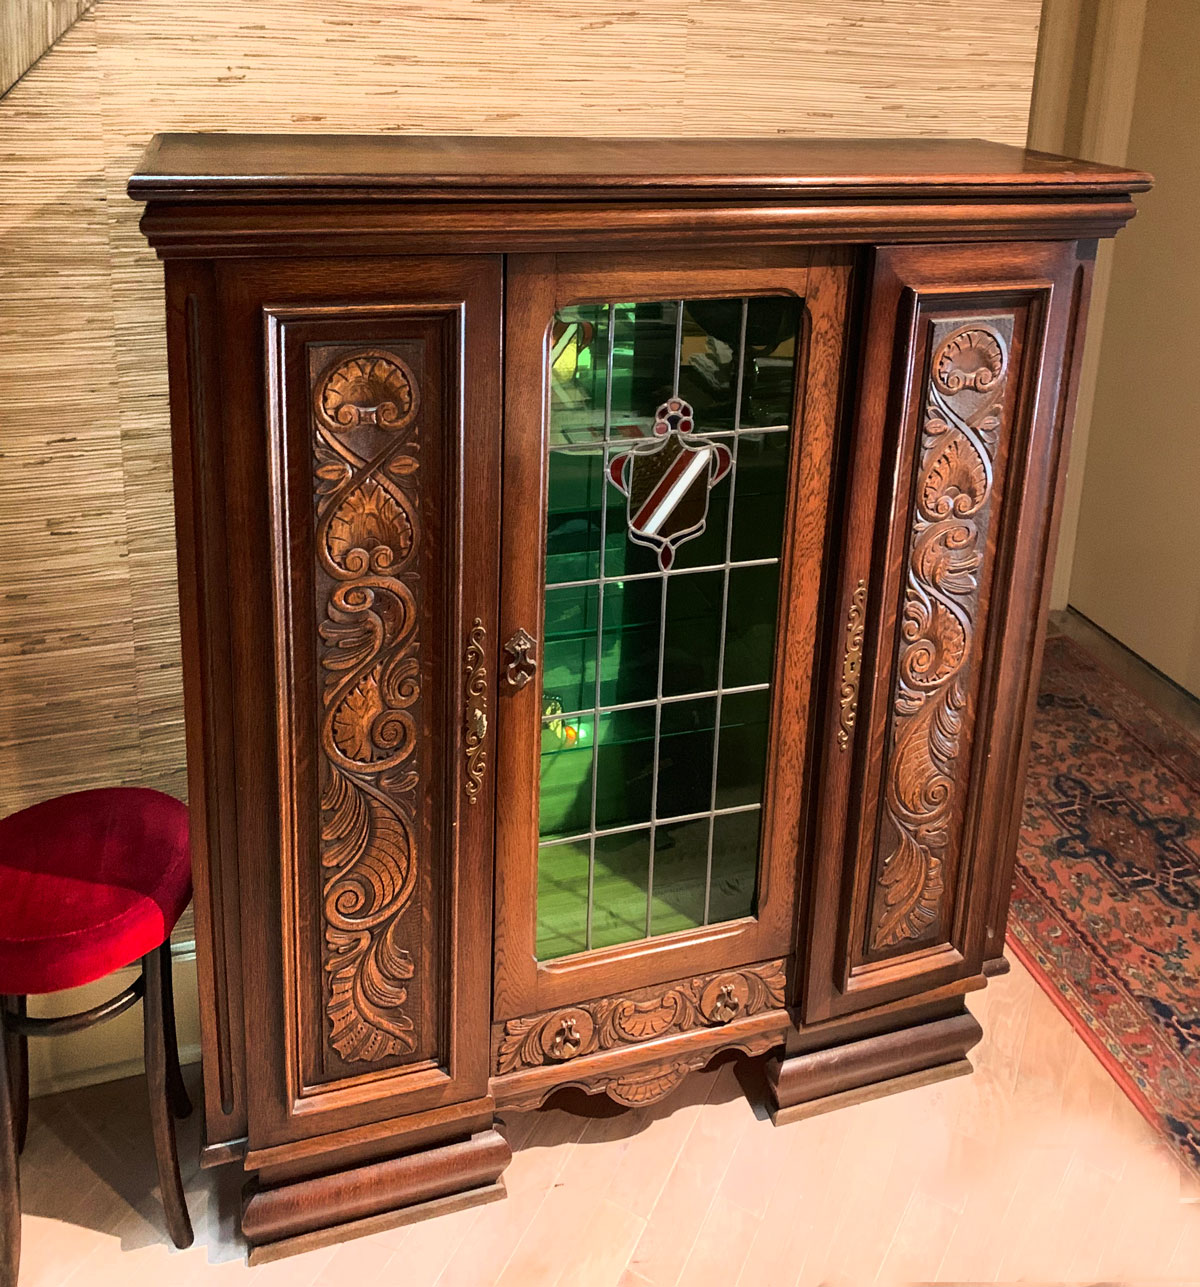 3 DOOR 1 DRAWER STAINED GLASS BOOK CASE: